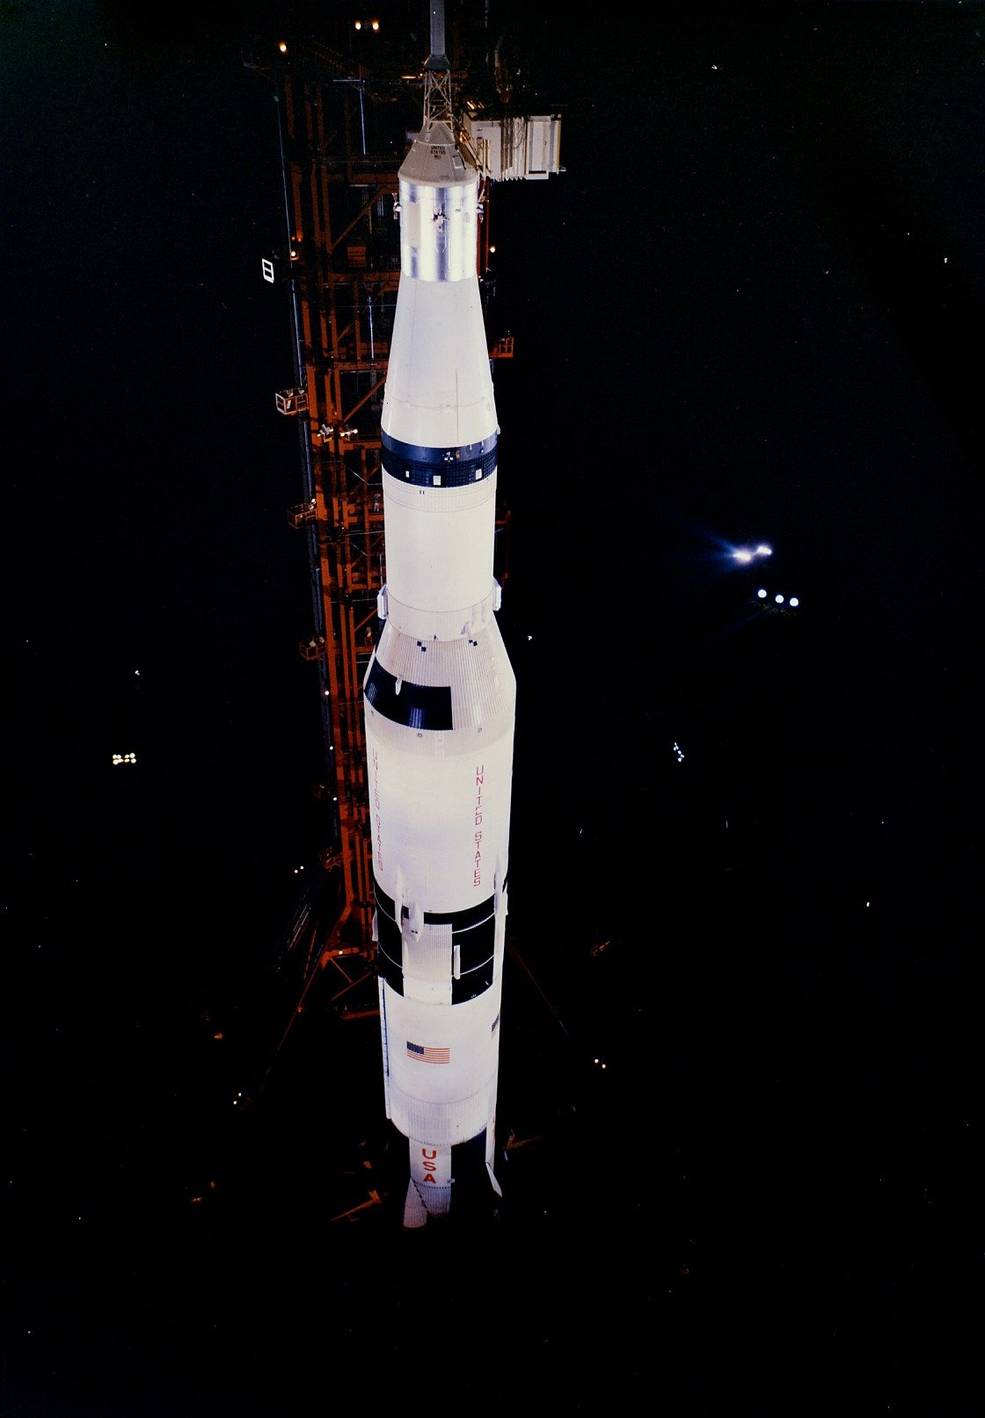 Apollo 4 during cddt